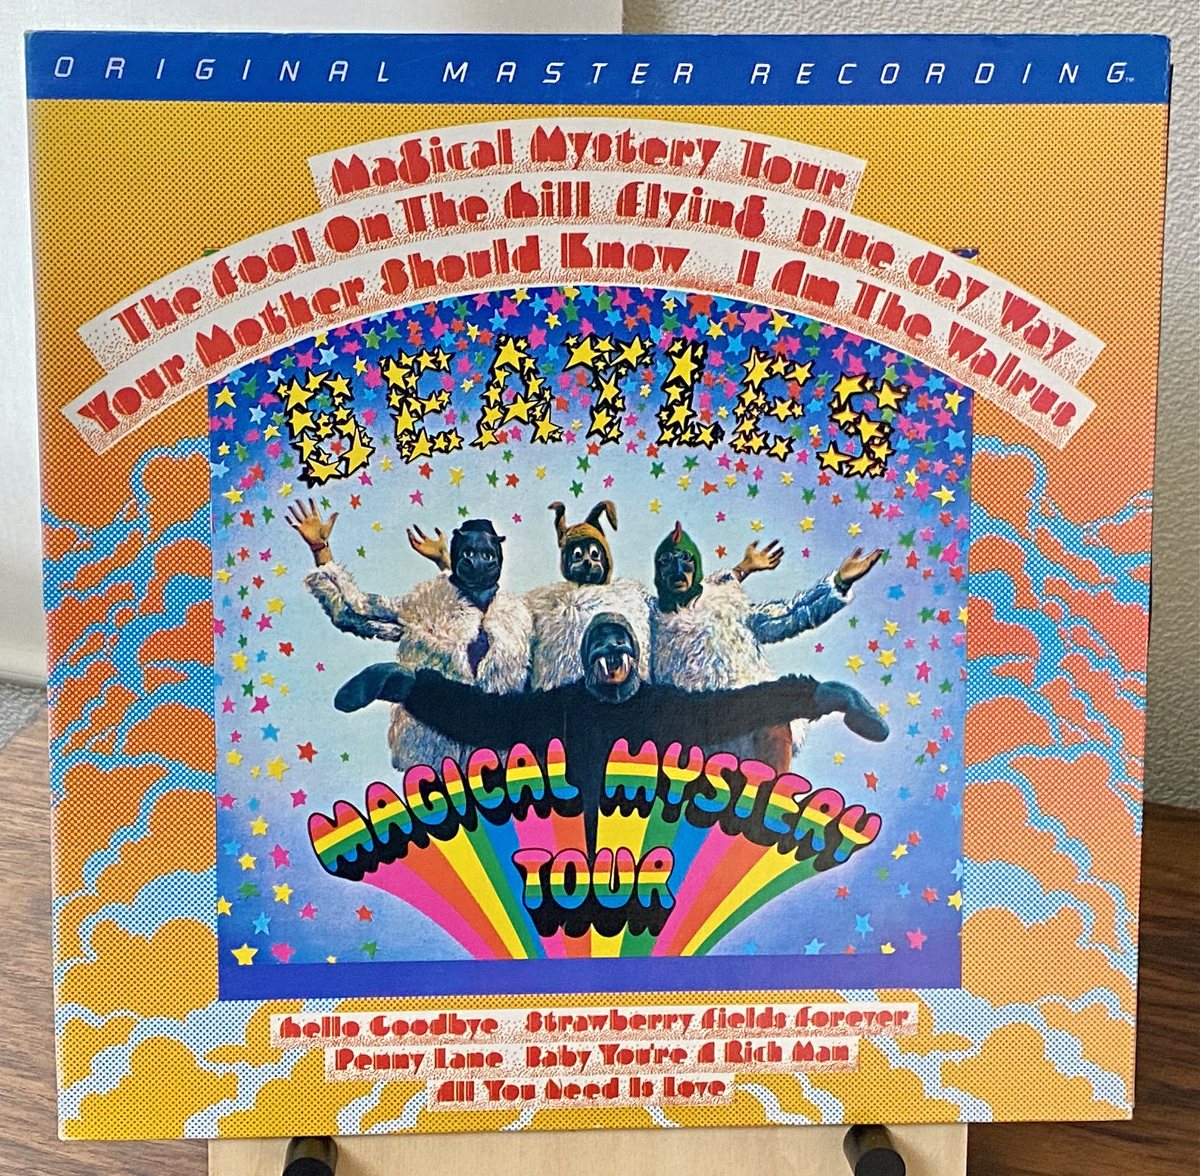 The Beatles『Magical Mystery Tour』（米MFSL高音質限定盤） ビートルズ MMT  Mobile Fidelity Sound Lab  Audiophile レア！！の画像1